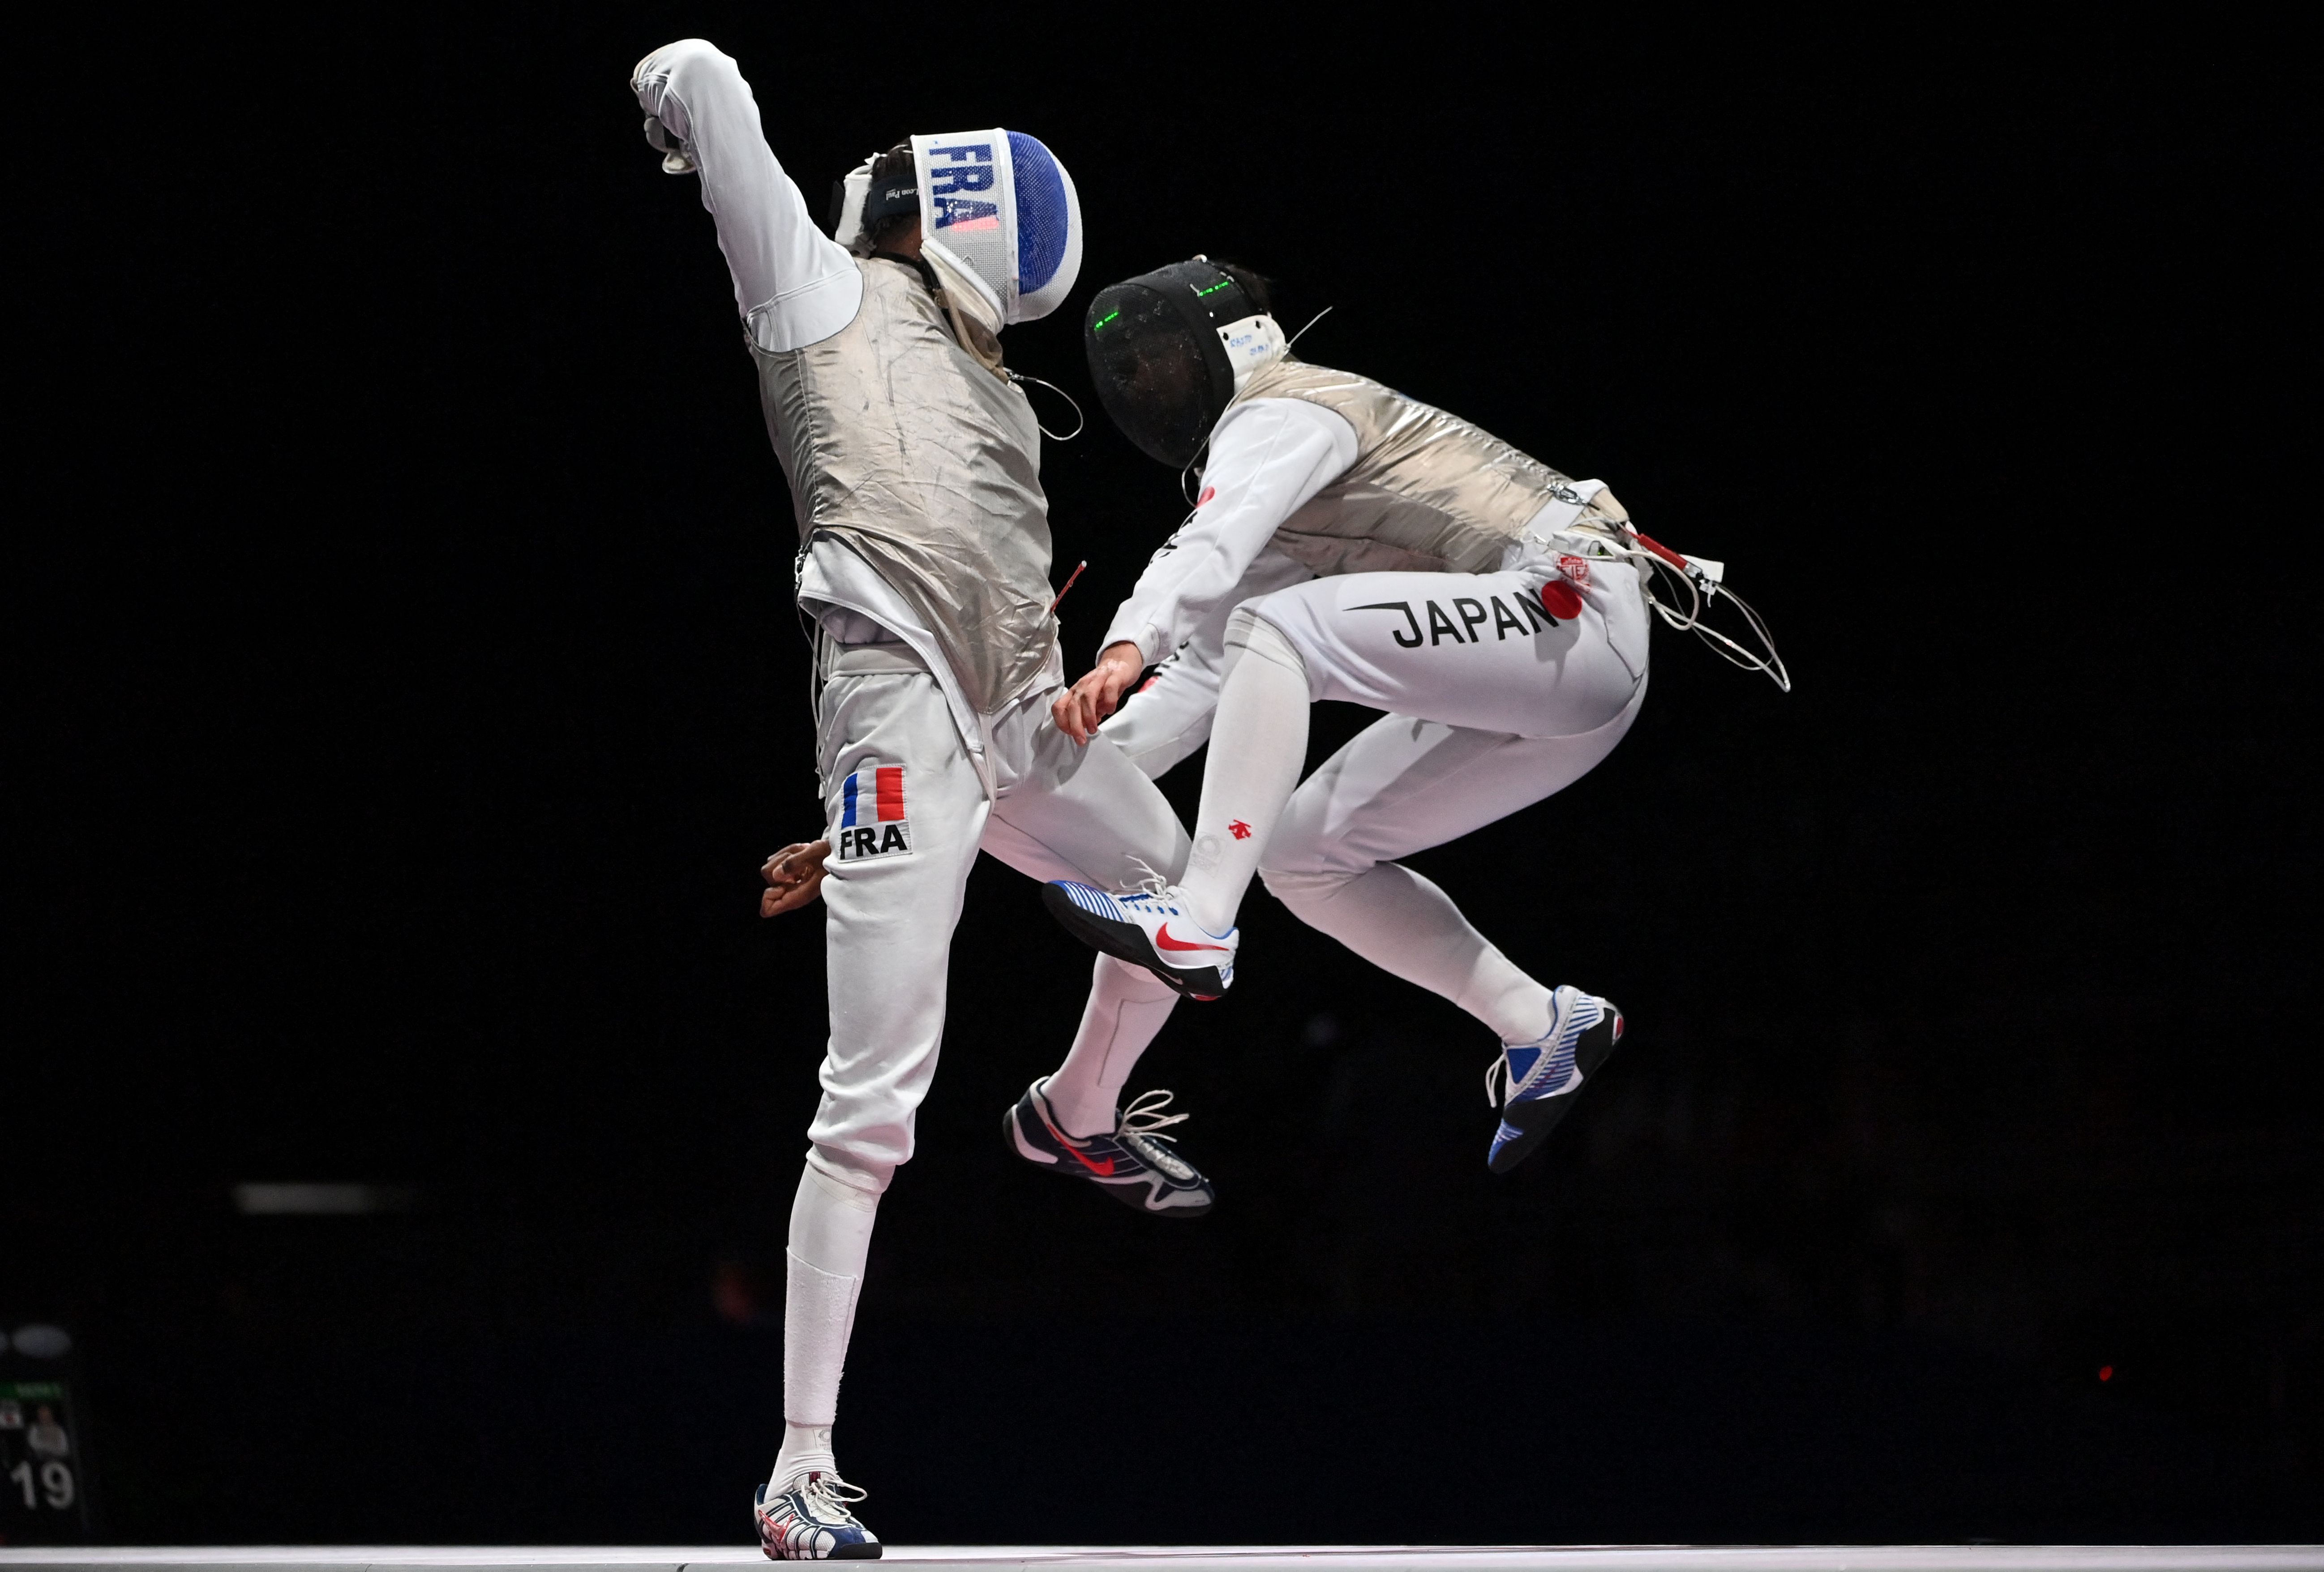 France's Enzo Lefort compete (L) against Japan's Toshiya Saito in the mens team foil semi-final bout during the Tokyo 2020 Olympic Games on August 1